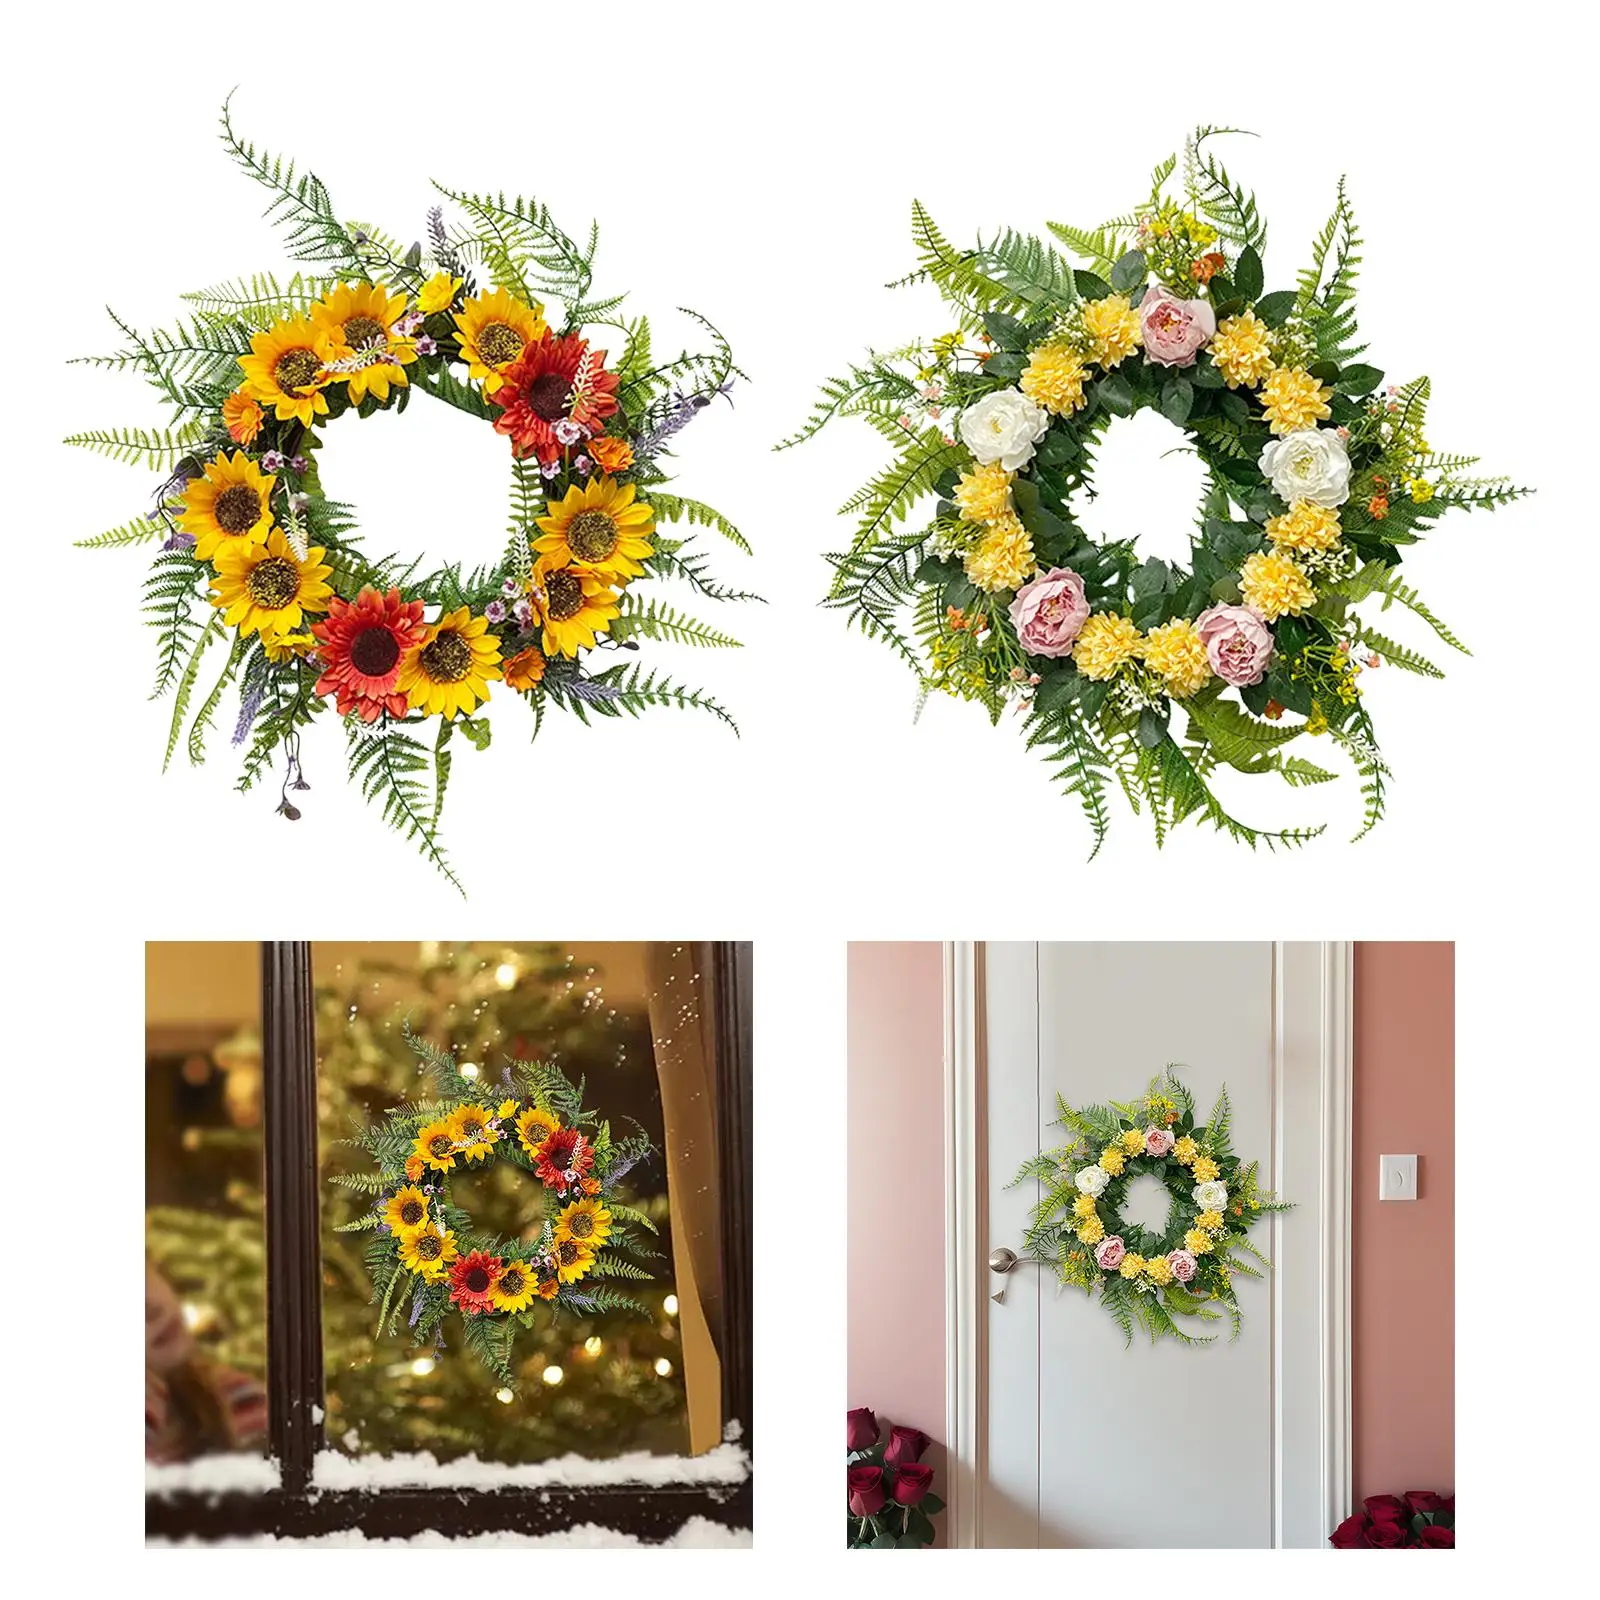 Spring Wreath for Front Door Outdoor Stylish Green Leaves Round Hanging Garland for All Seasons Porch Wall Spring Garden